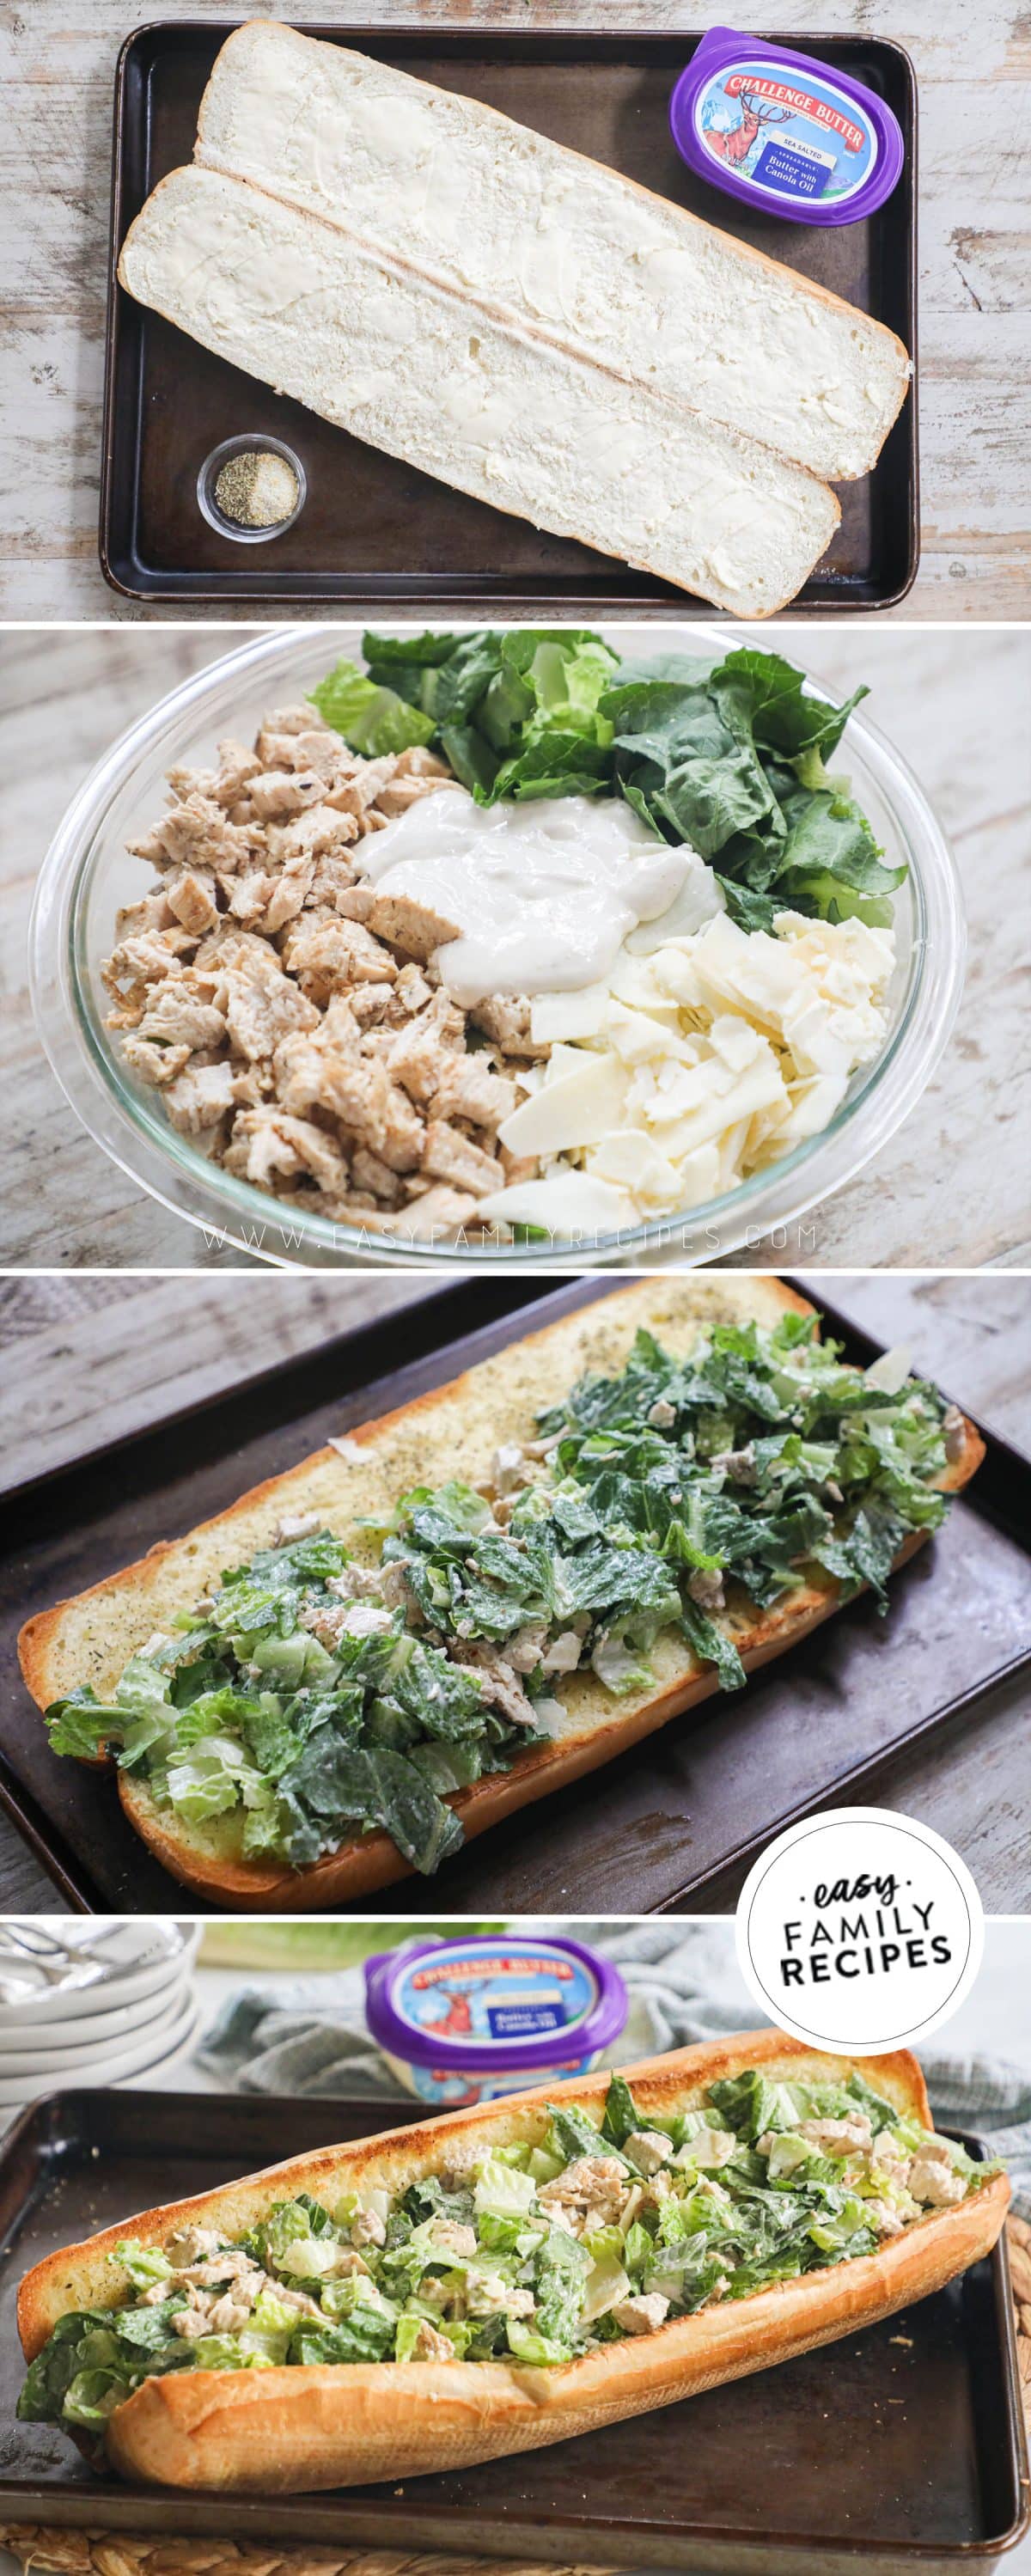 process photos for how to make chicken caesar sandwich on garlic bread. 1. Butter bread and add spices and toast. 2. Make chicken caesar salad. 3. Pile chicken caesar salad on garlic toast bread. 4. Slice into sandwiches.